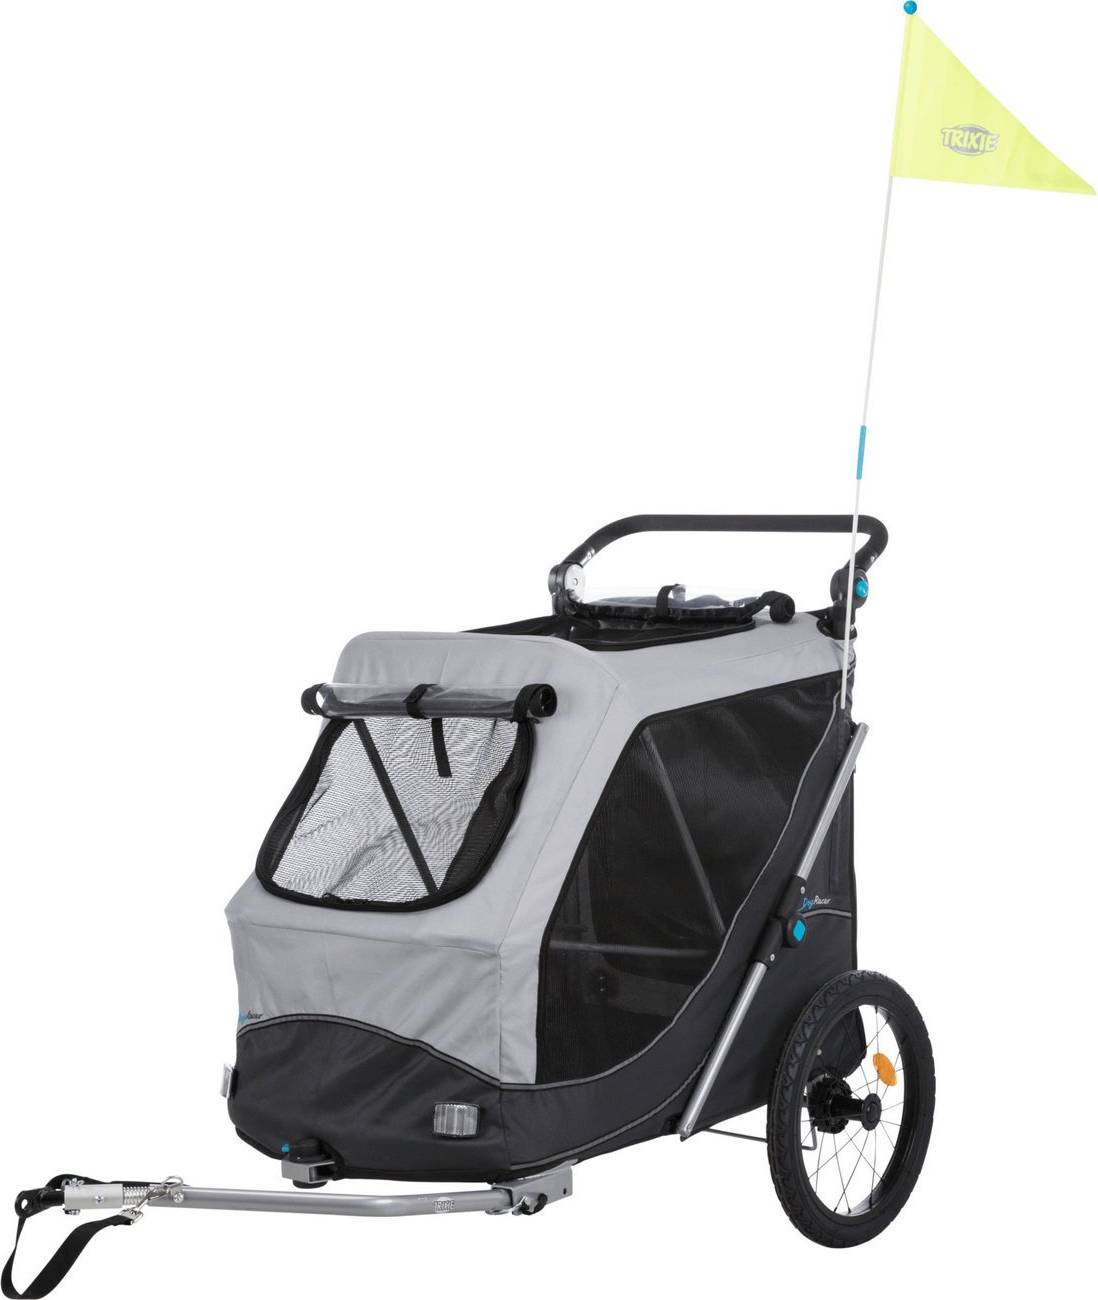 Cykelvagn hund Trixie Bicycle Trailer for Dogs M